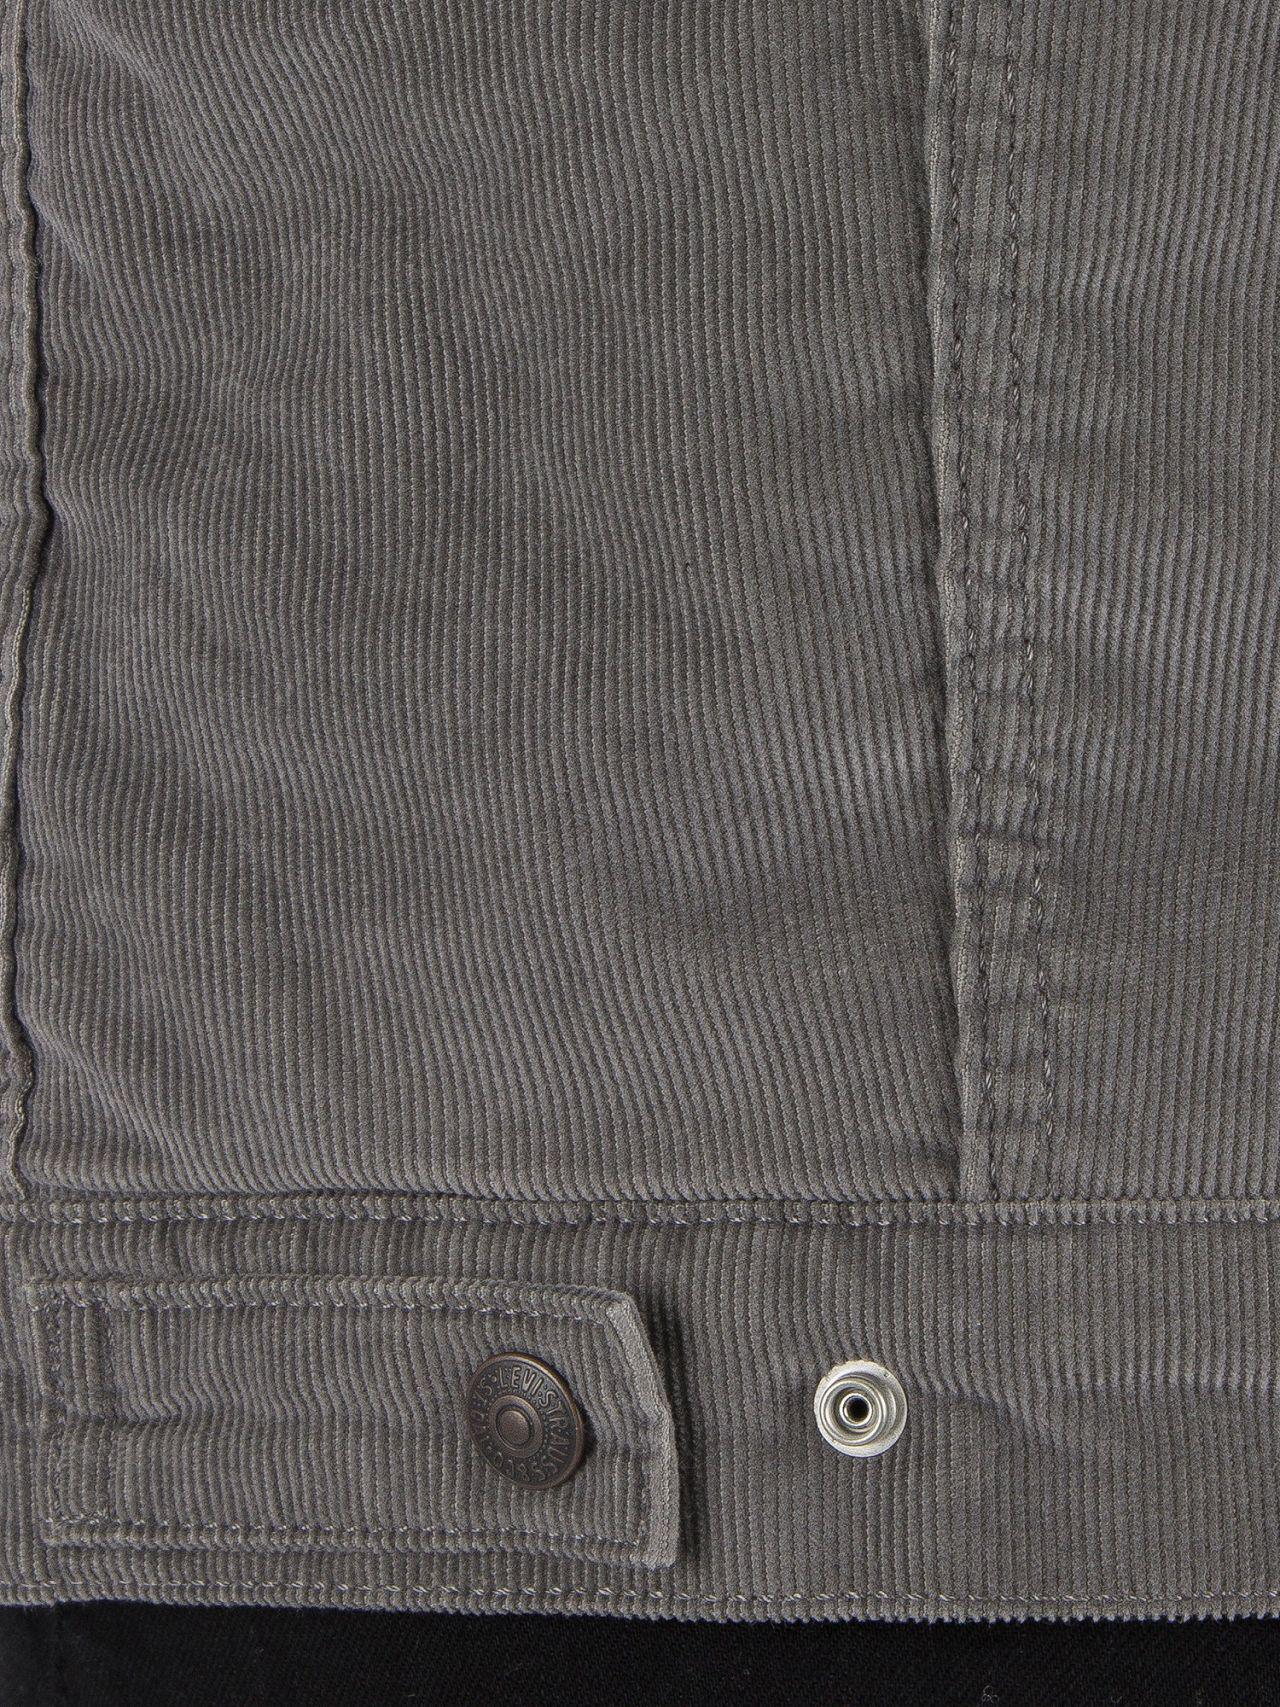 levis sherpa pewter